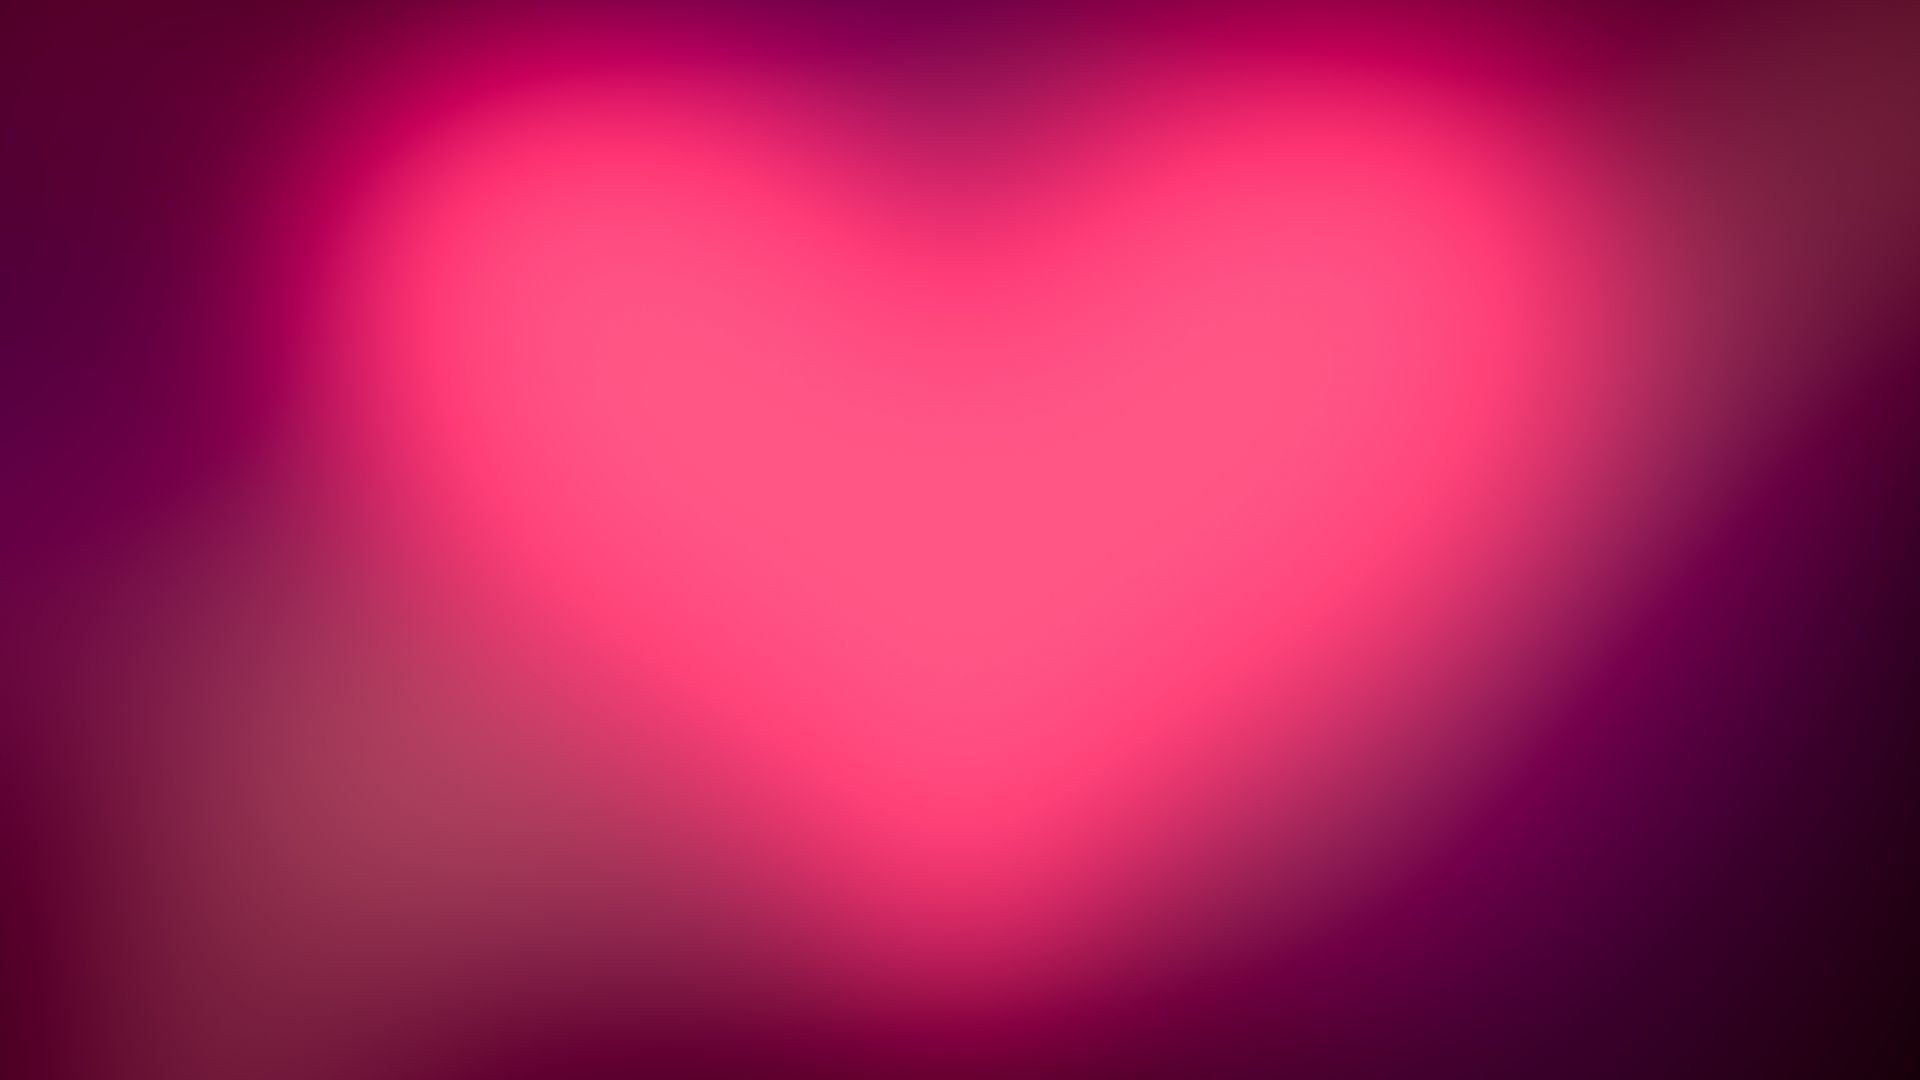 A 4K ultra HD mobile wallpaper with a minimalist abstract heart